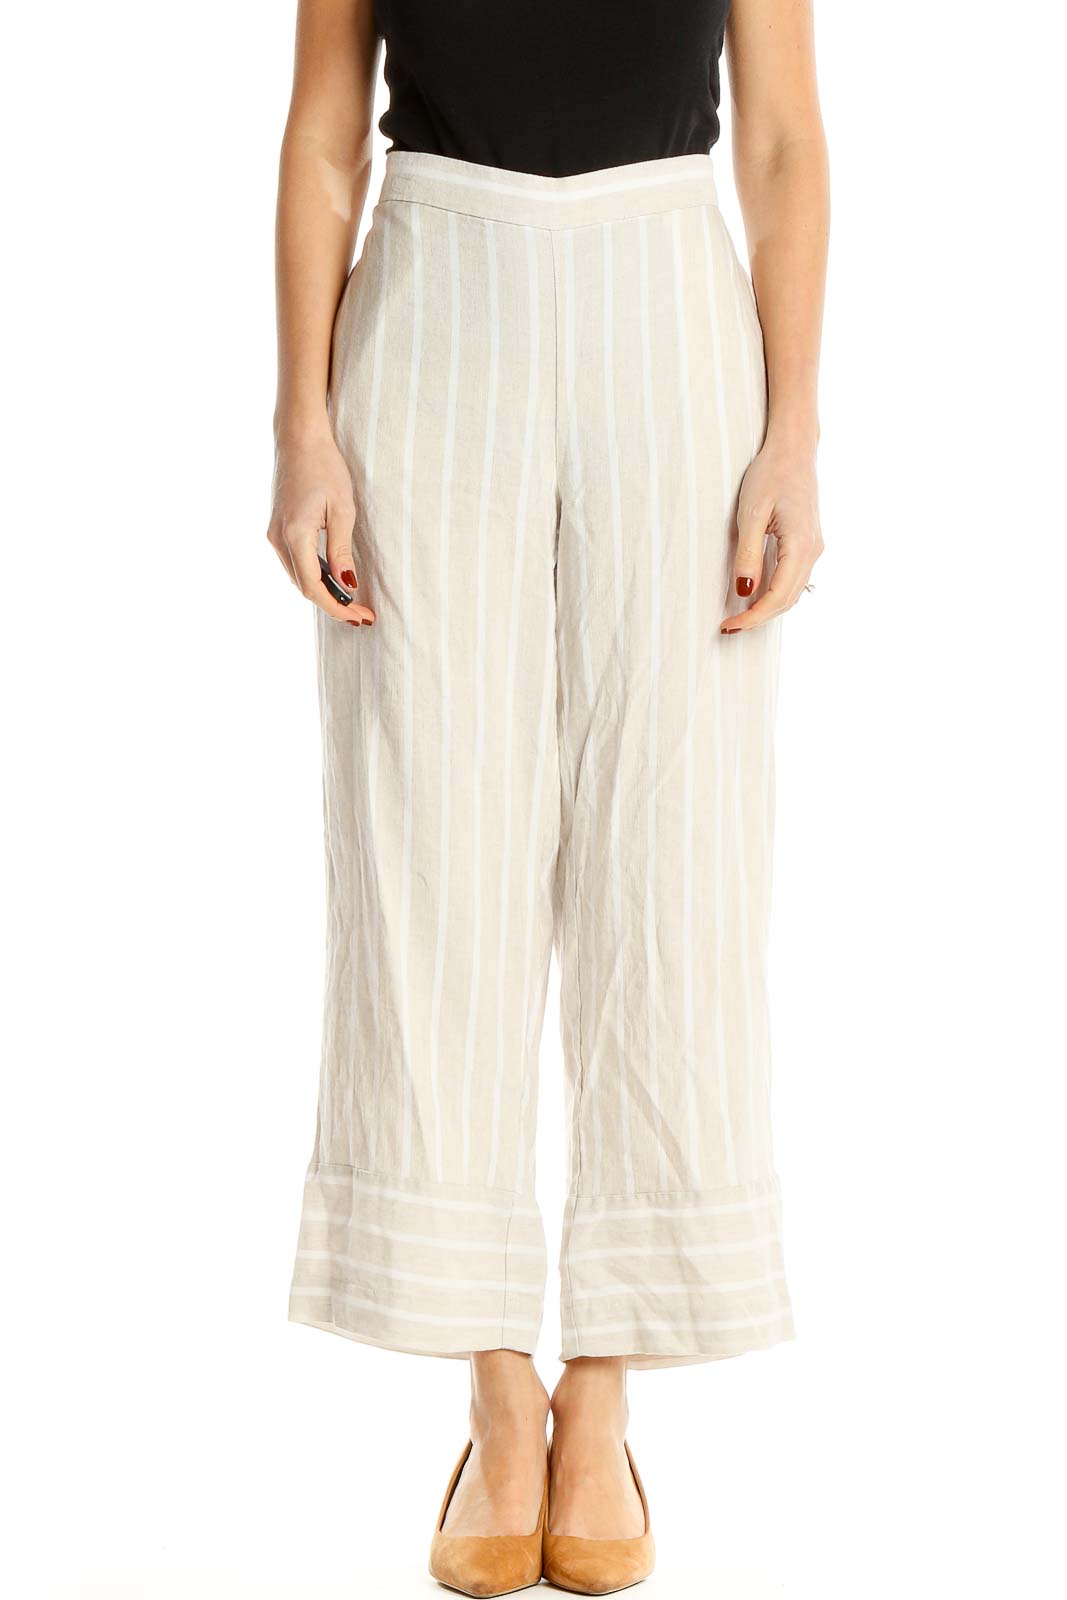 Beige Striped Holiday Culottes Pants Front